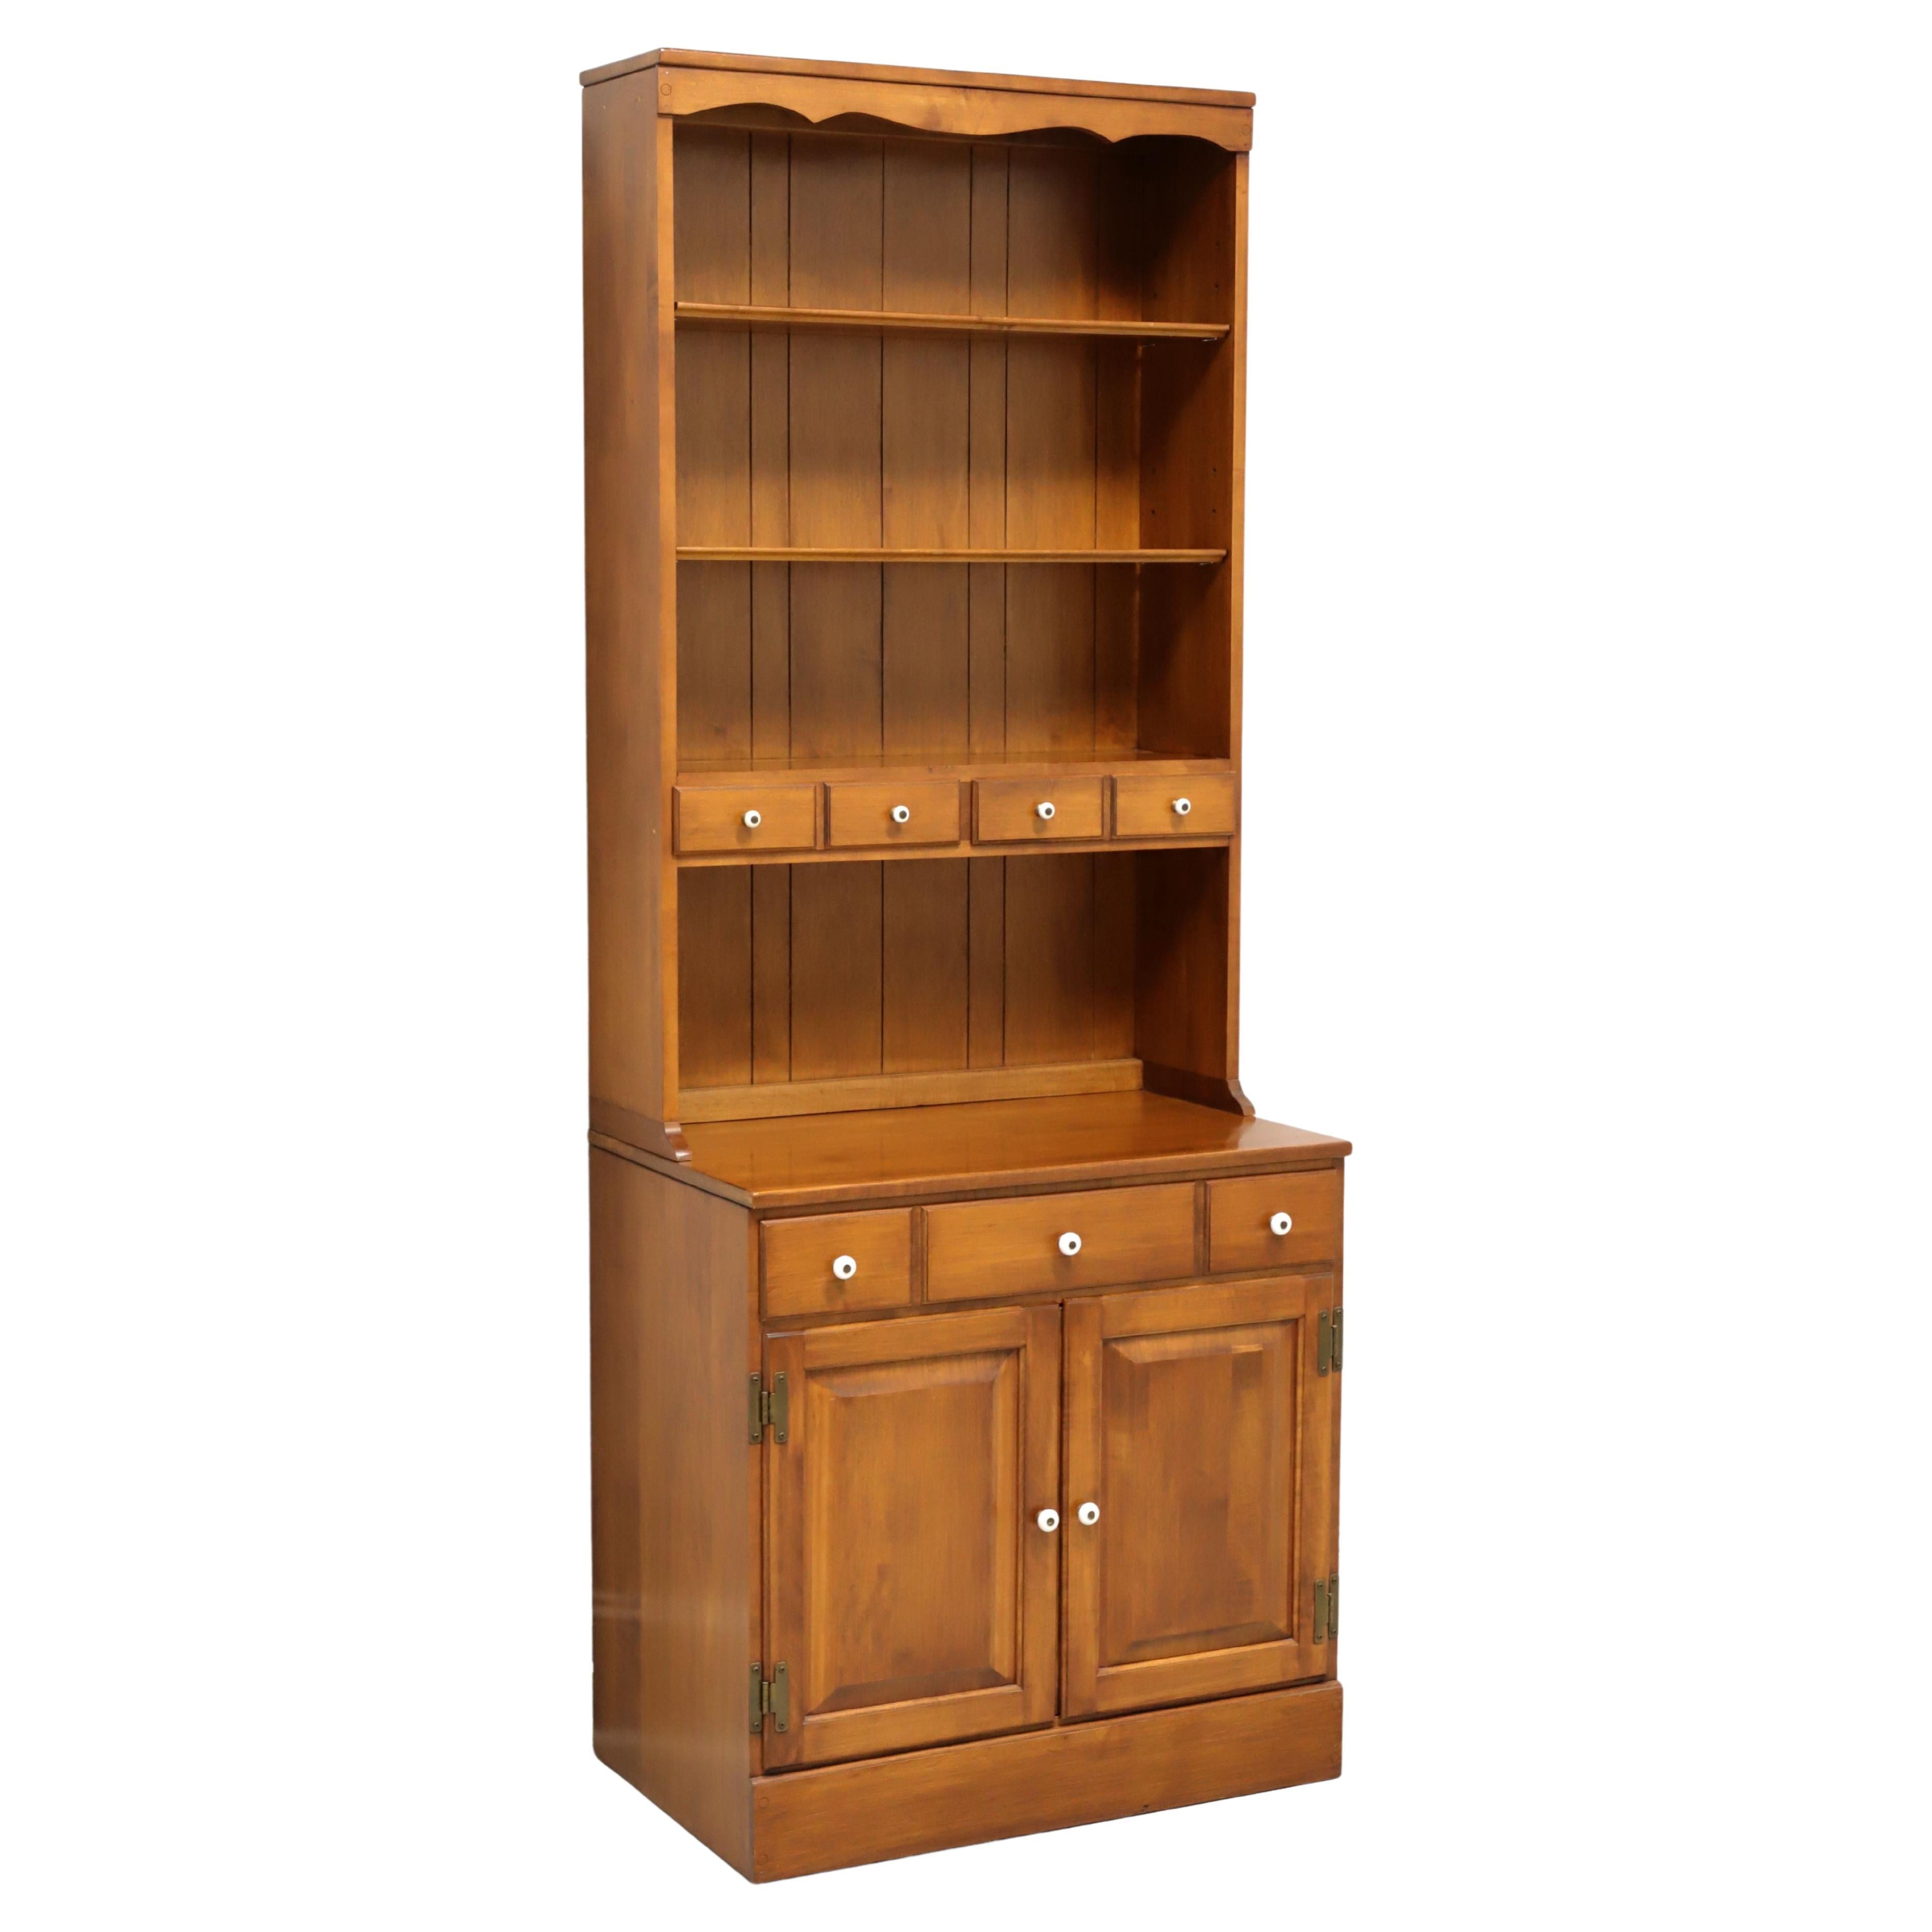 VERMONT OF WINOOSKI Solid Rock Maple Colonial Style Bookcase with Cabinet